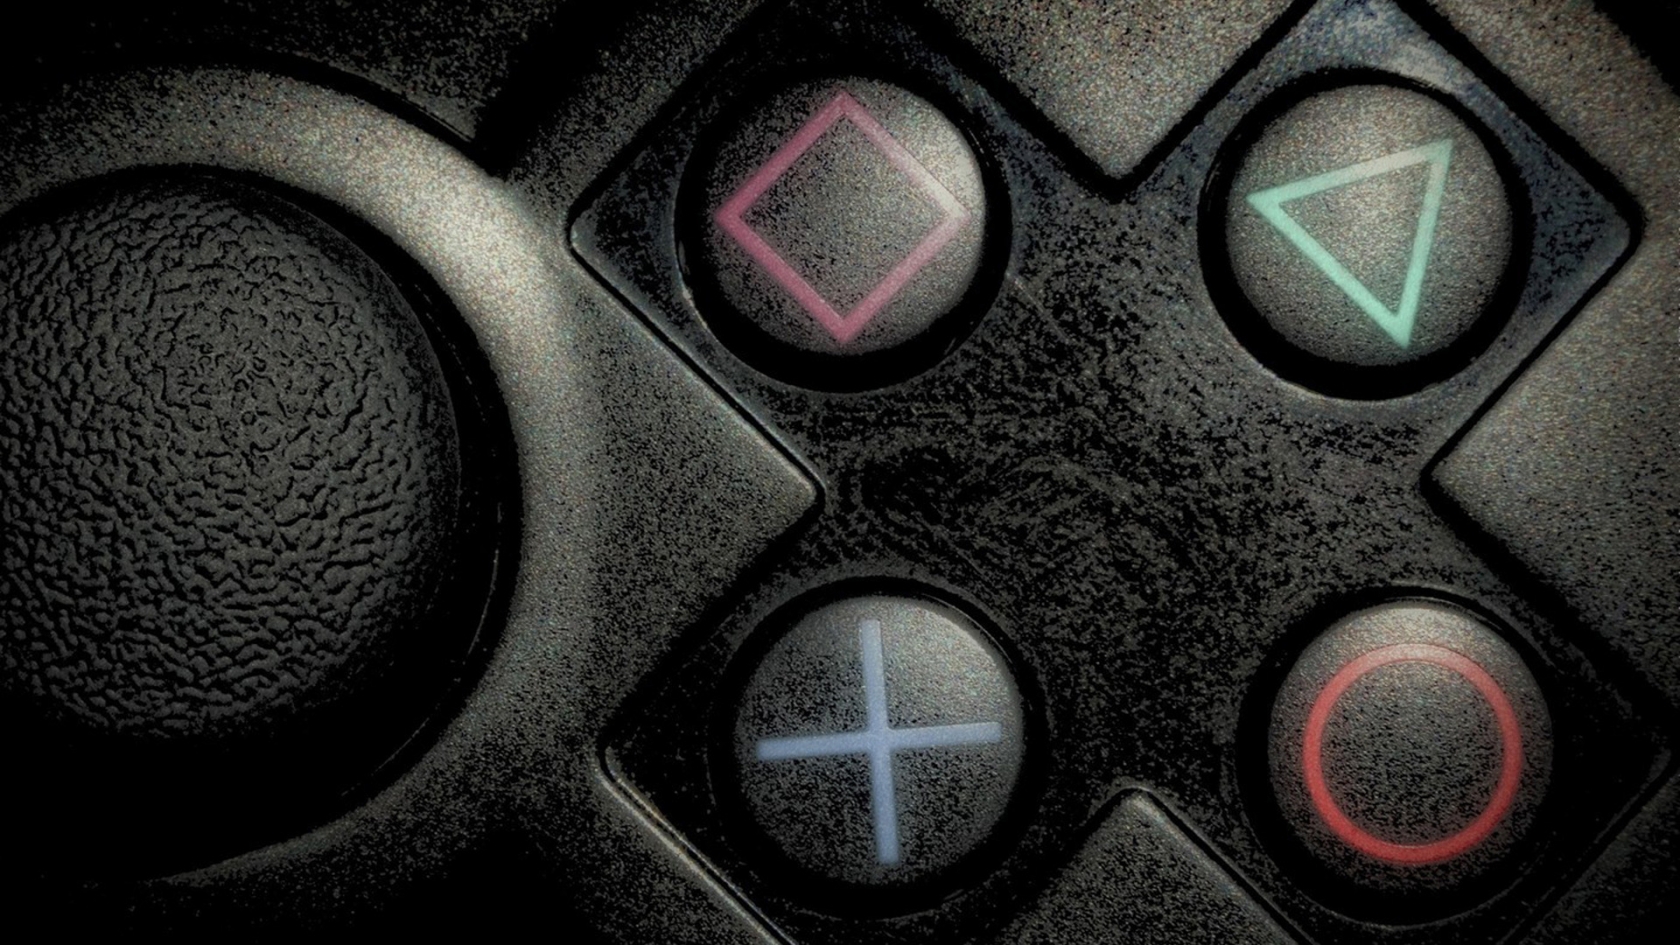 Playstation Buttons for 1680 x 945 HDTV resolution